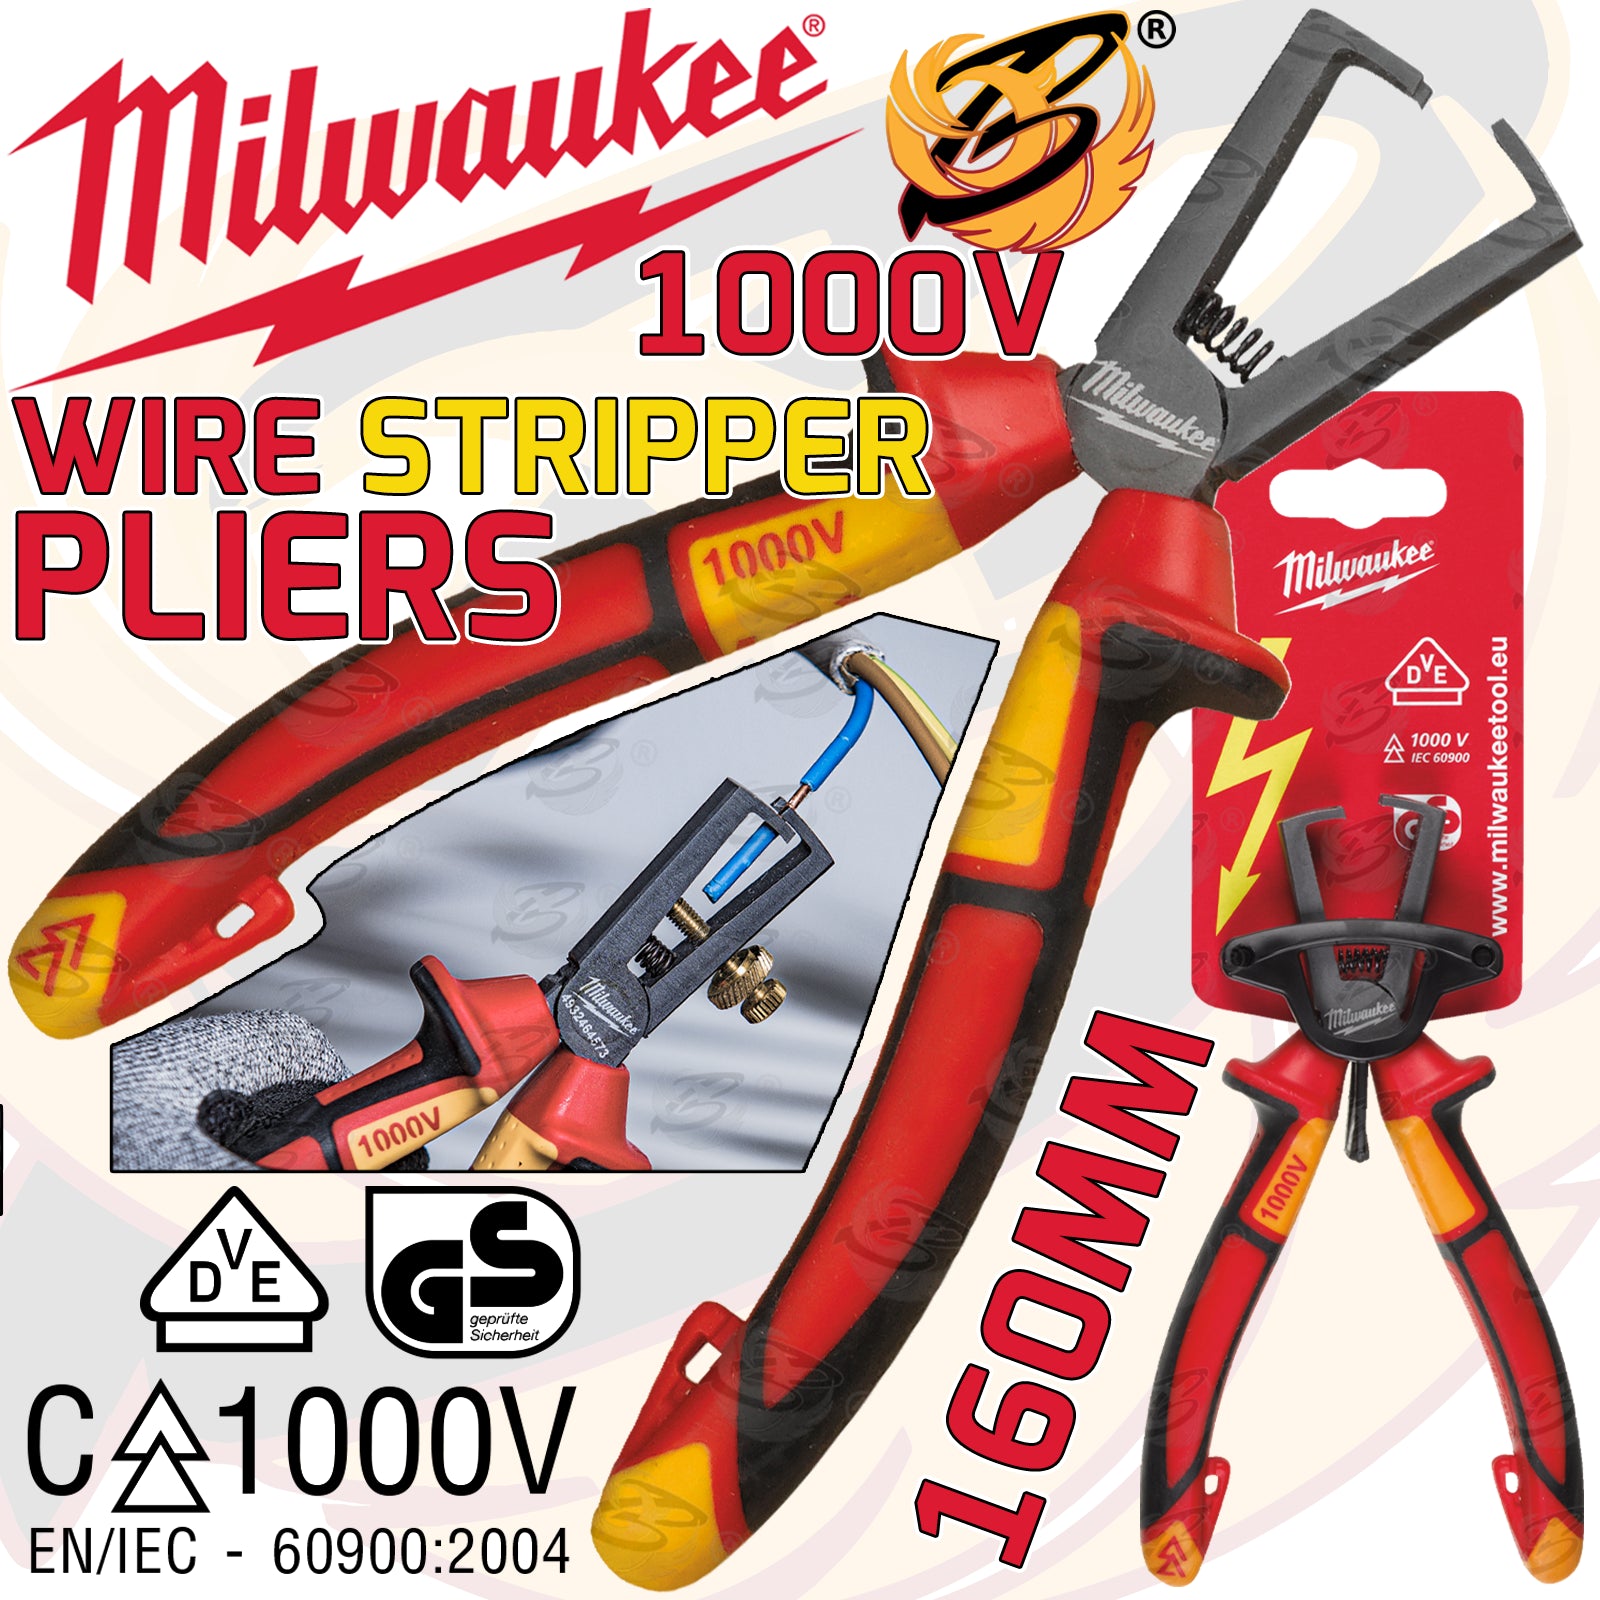 MILWAUKEE 1000V VDE WIRE STRIPPING PLIERS 160MM